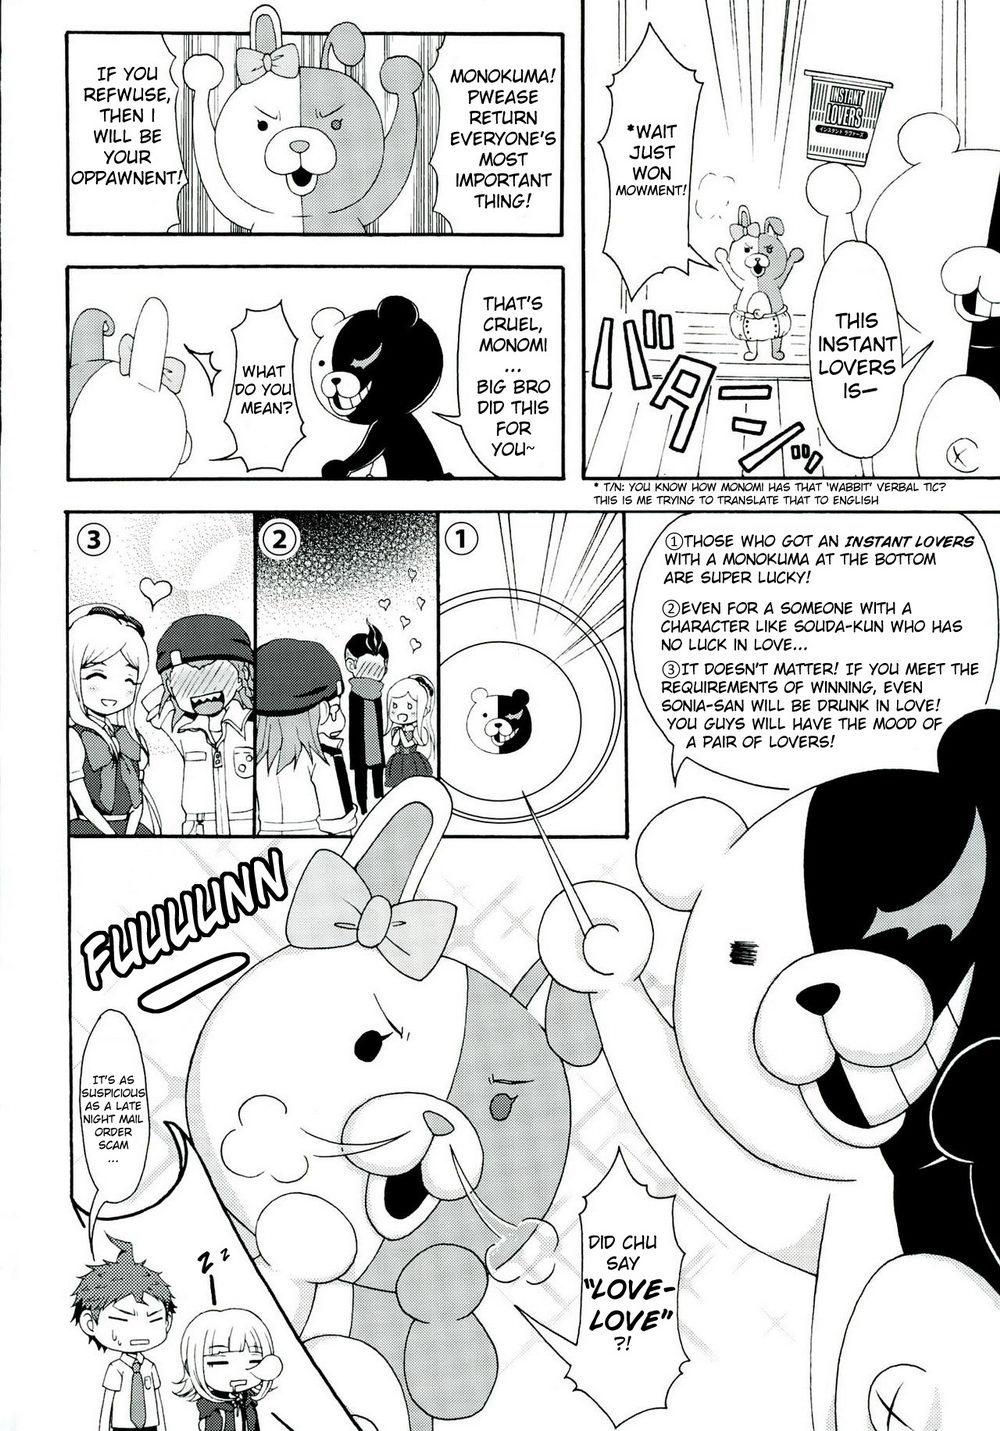 Style INSTANT LOVERS - Danganronpa Exhibitionist - Page 10